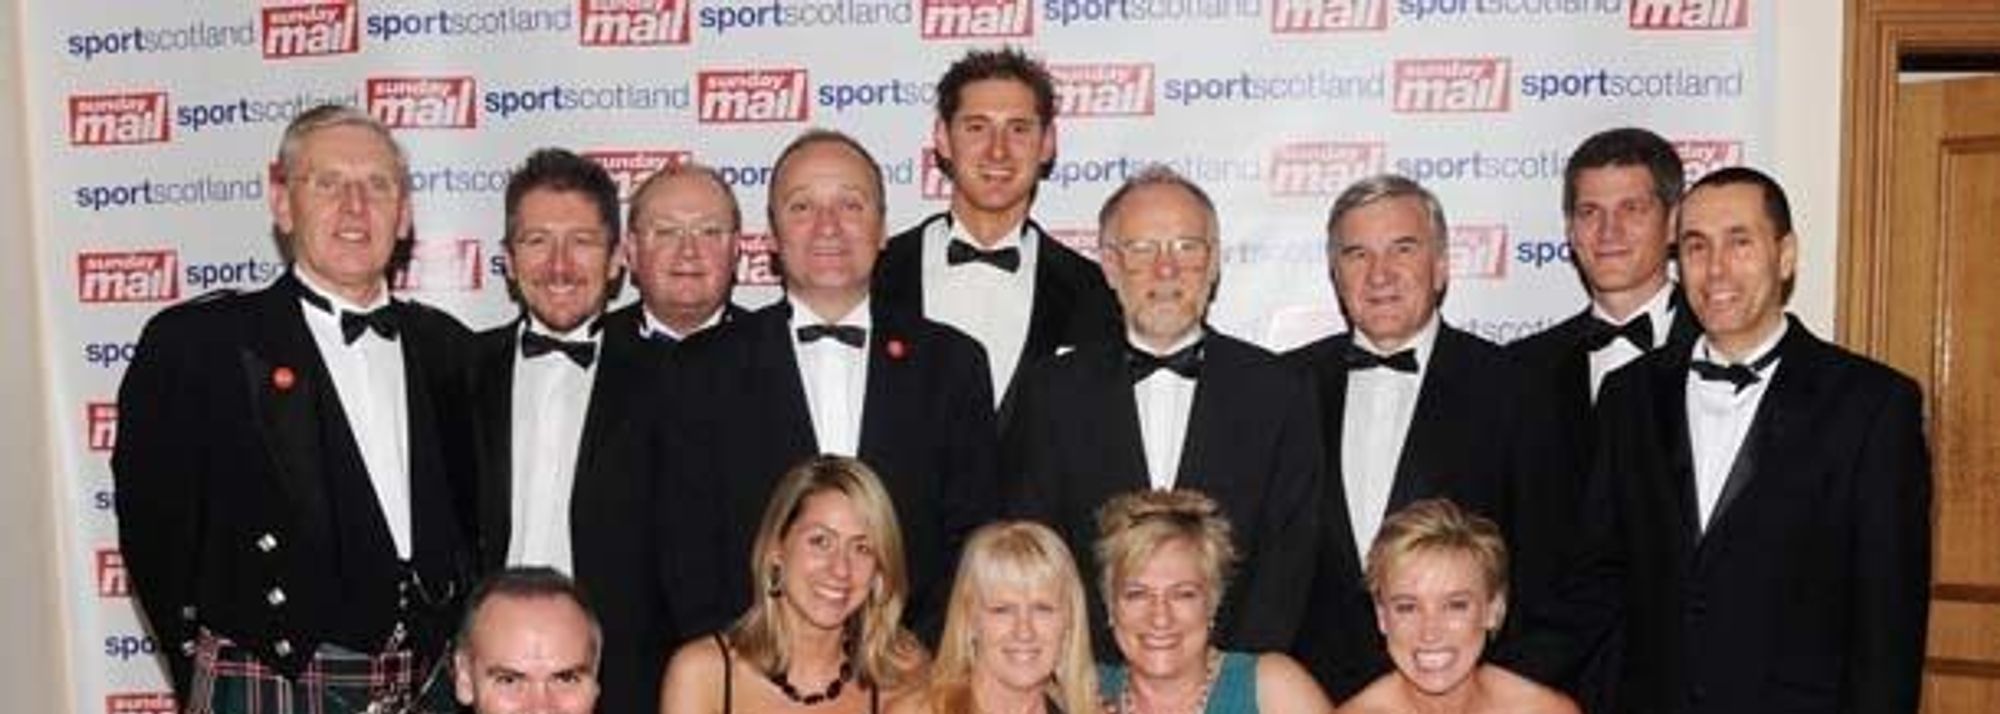 - The 36th IAAF World Cross Country Championships, Edinburgh 2008 won the Event of the Year Award at the Sunday Mail/sportscotland Scottish Sports Awards 2008 held in Glasgow, Scotland on Thursday 4 December.</P>
<P mce_keep="true">&nbsp;</P>